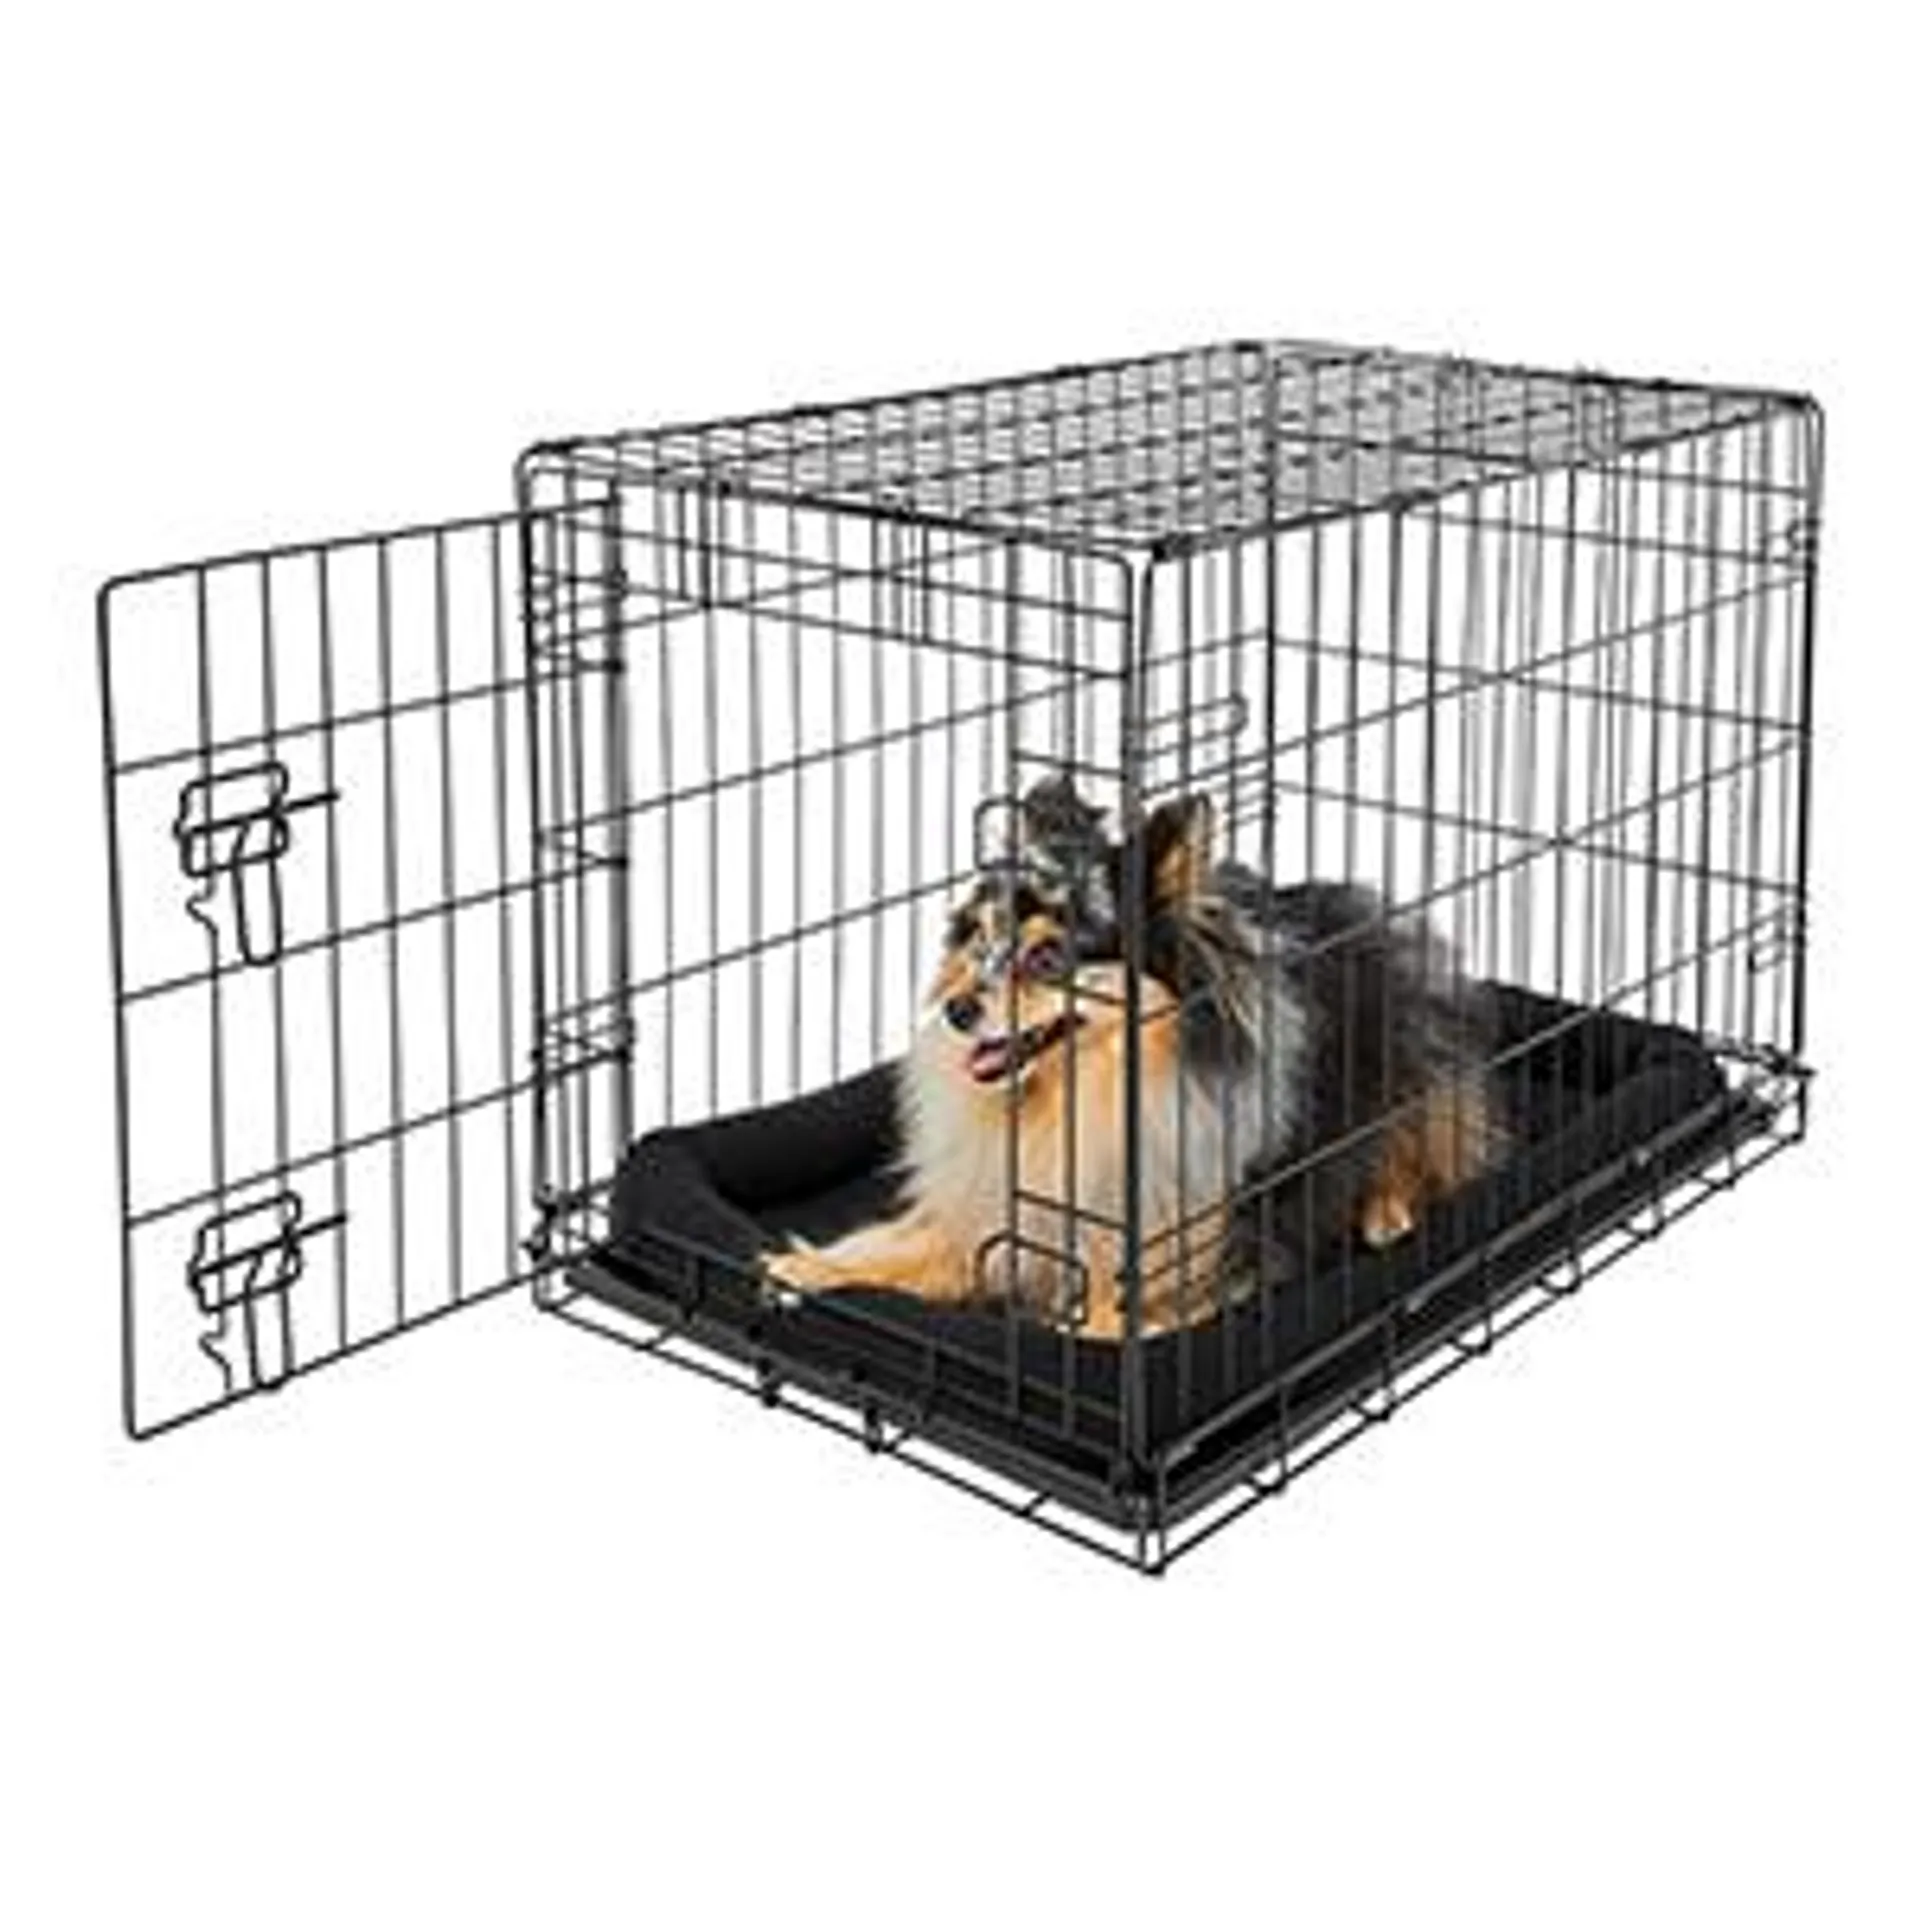 Pets at Home Single Door Dog Crate Black Small